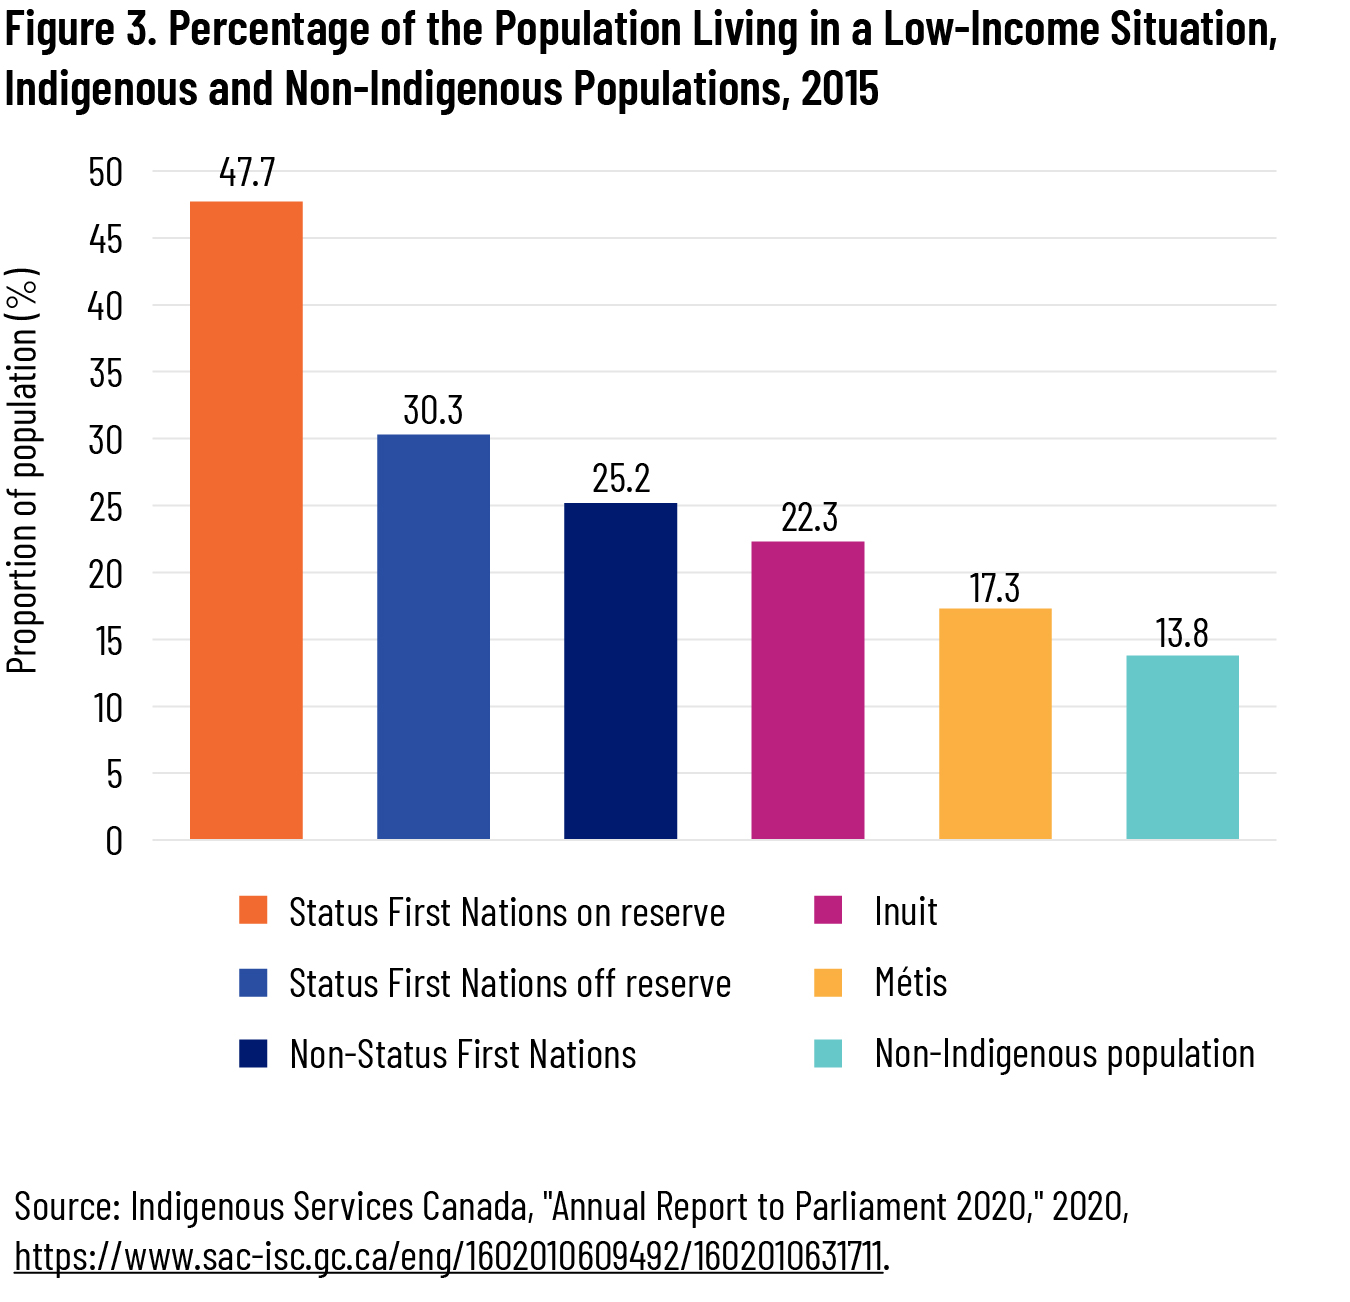 Figure 3. Percentage of the Population Living in a Low-Income Situation, Indigenous and Non-Indigenous Populations, 2015